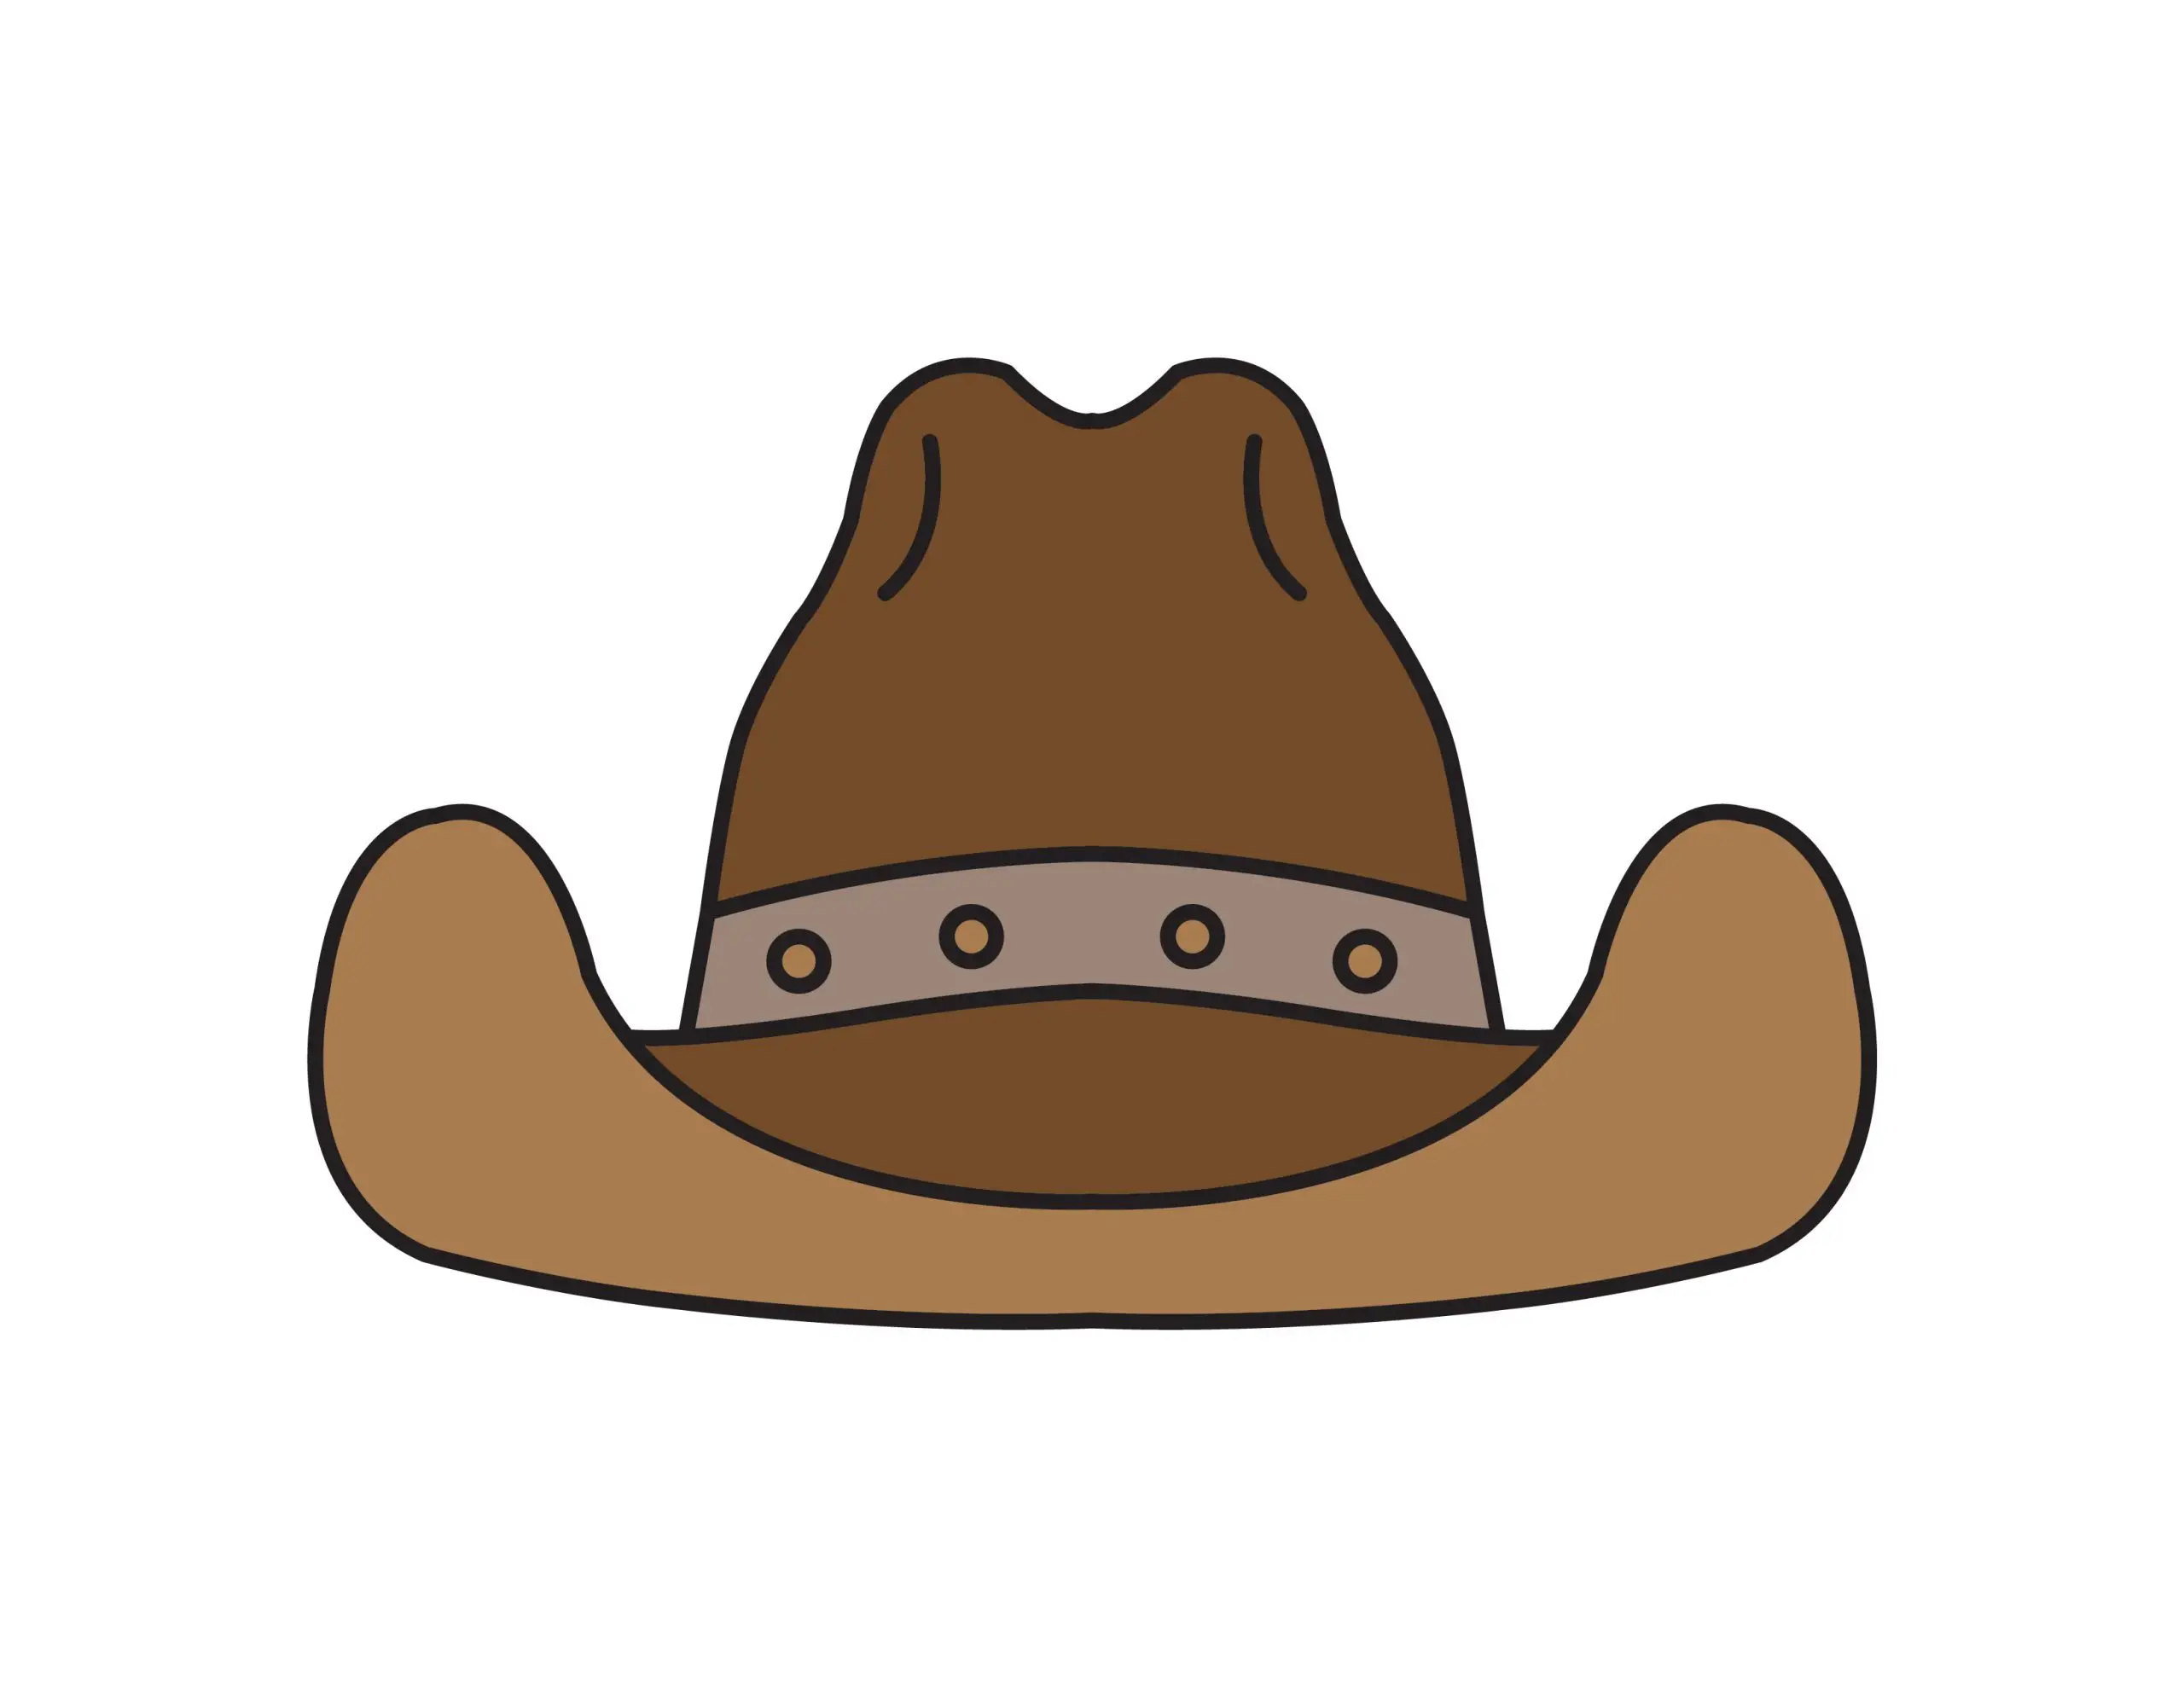 How To Draw a Gallon Cowboy Hat (Simple Steps Cartoon